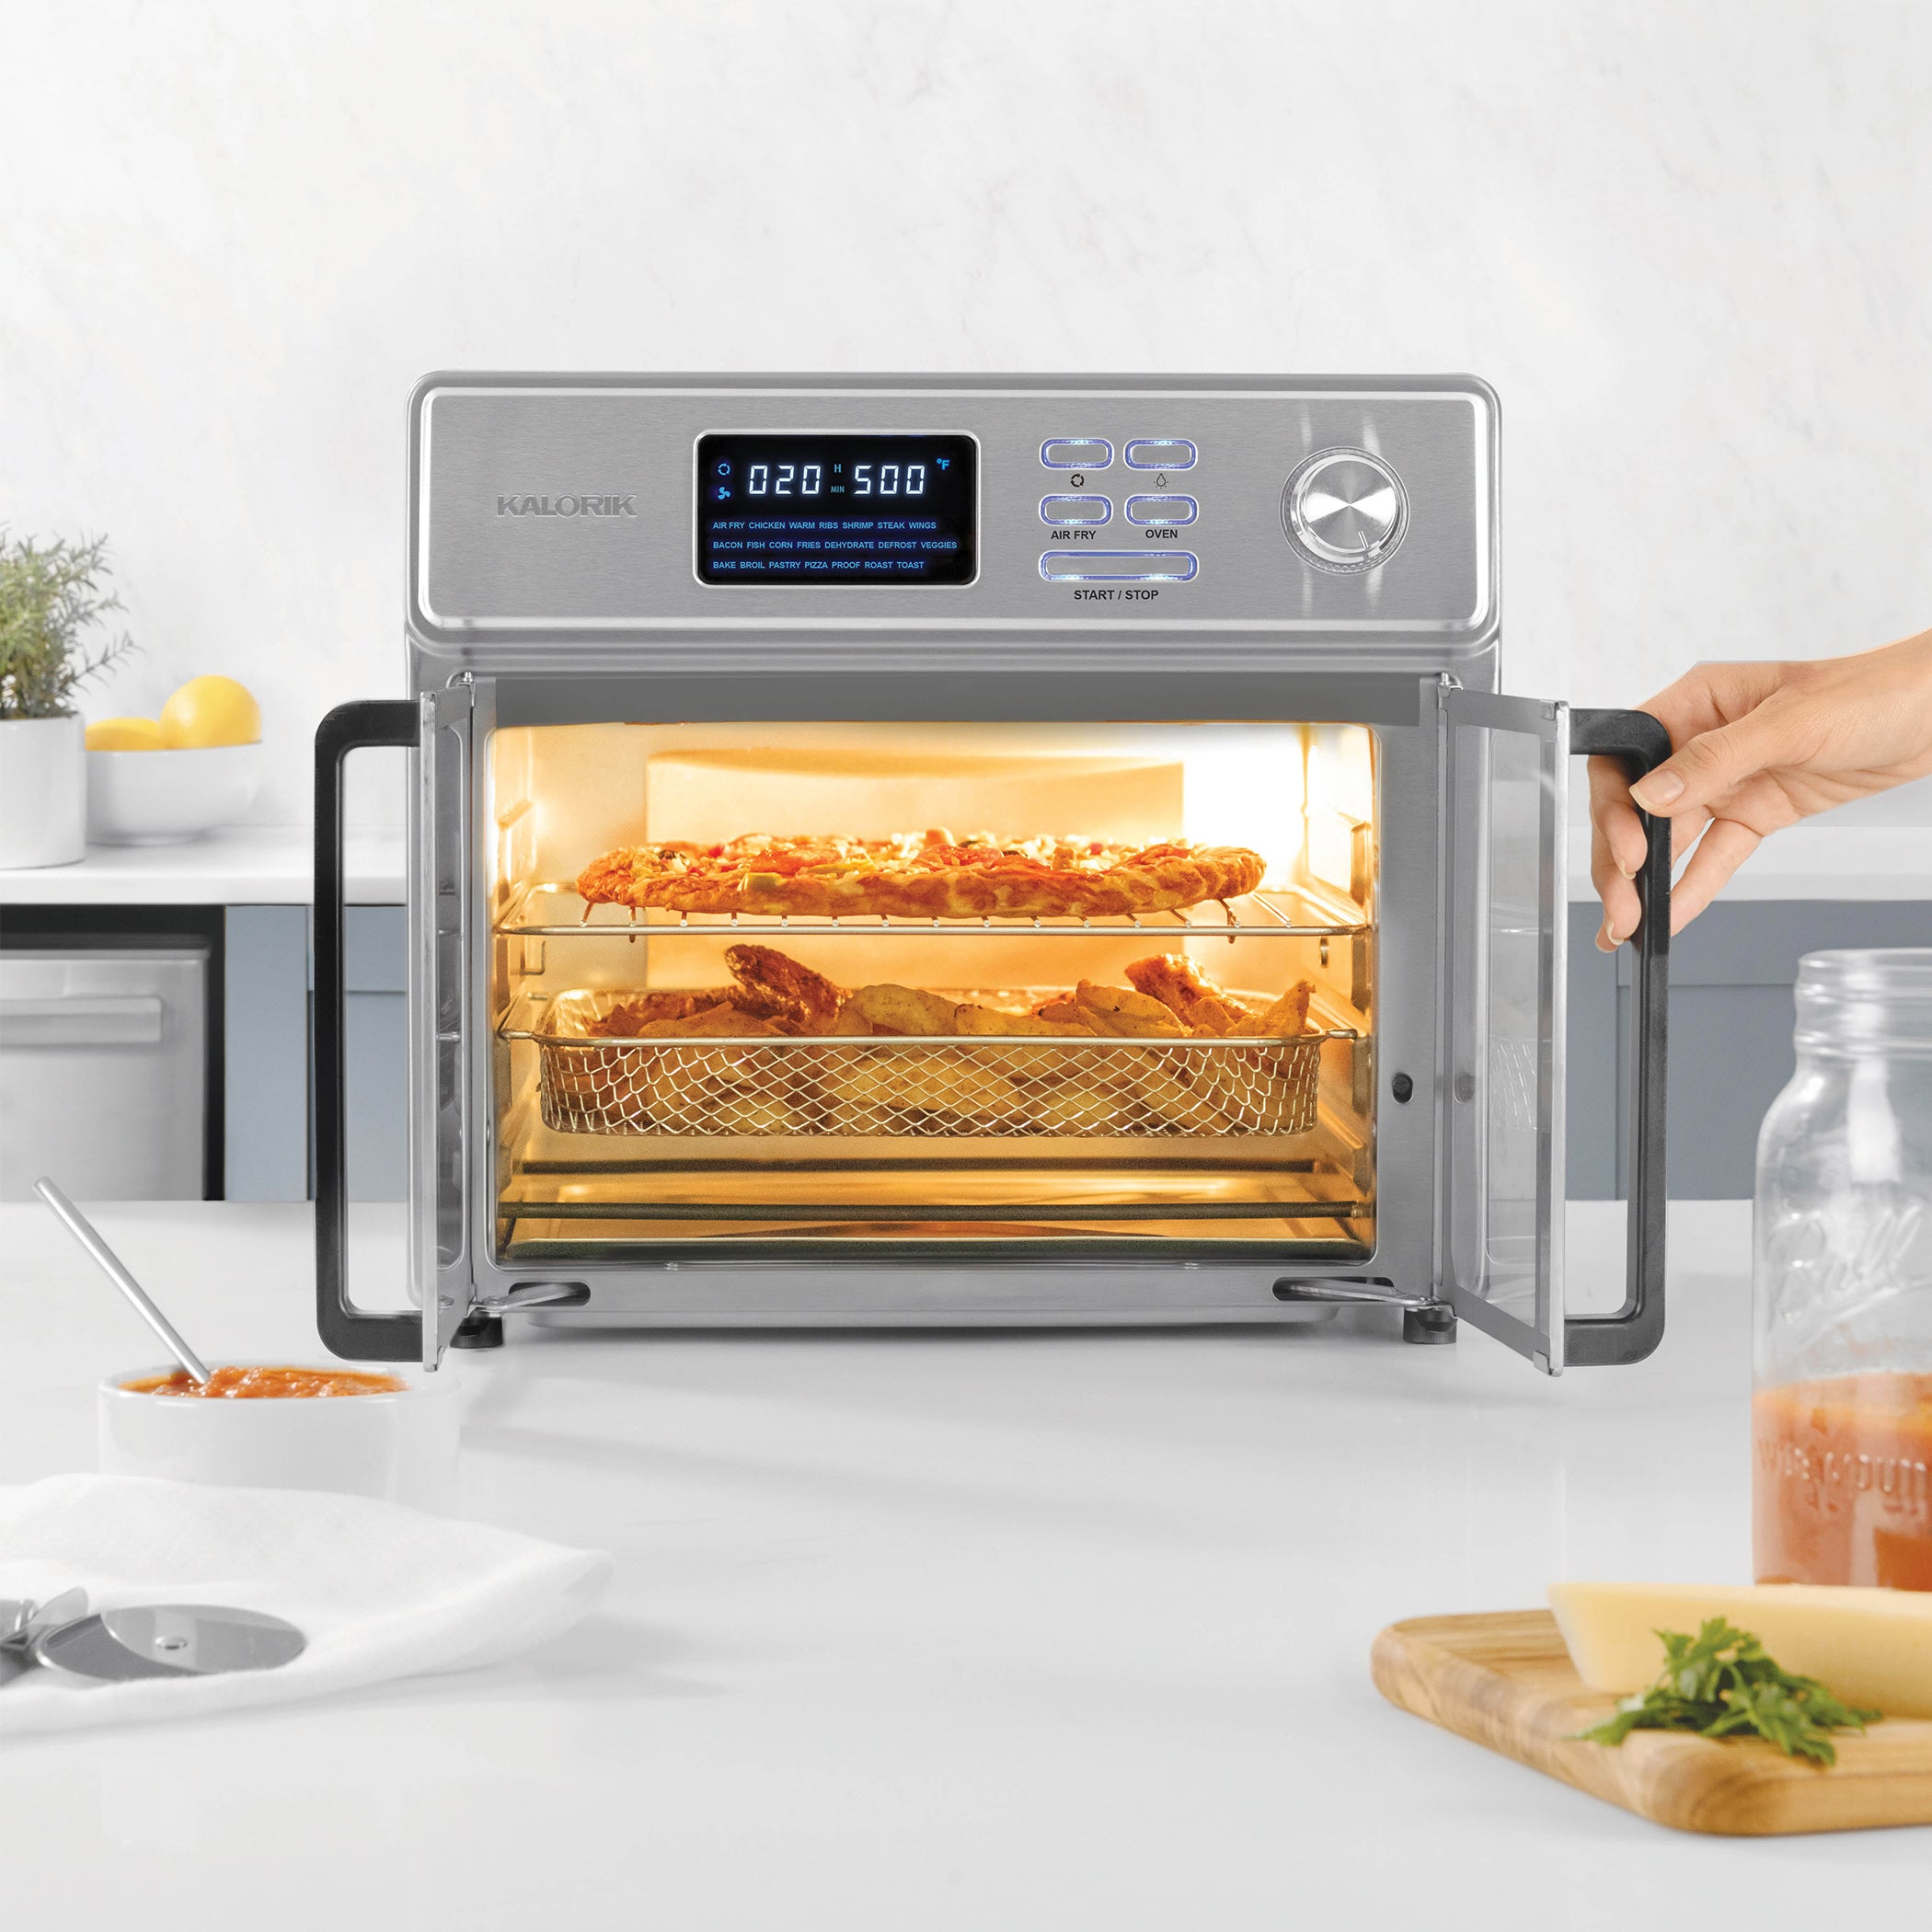 Multi-Use Air Fryer Oven Combo, Stainless Steel Convection Toaster Oven,  1700W, Large 25L Countertop Broiler, fit 12 Pizza, with 7 Accessories, 18